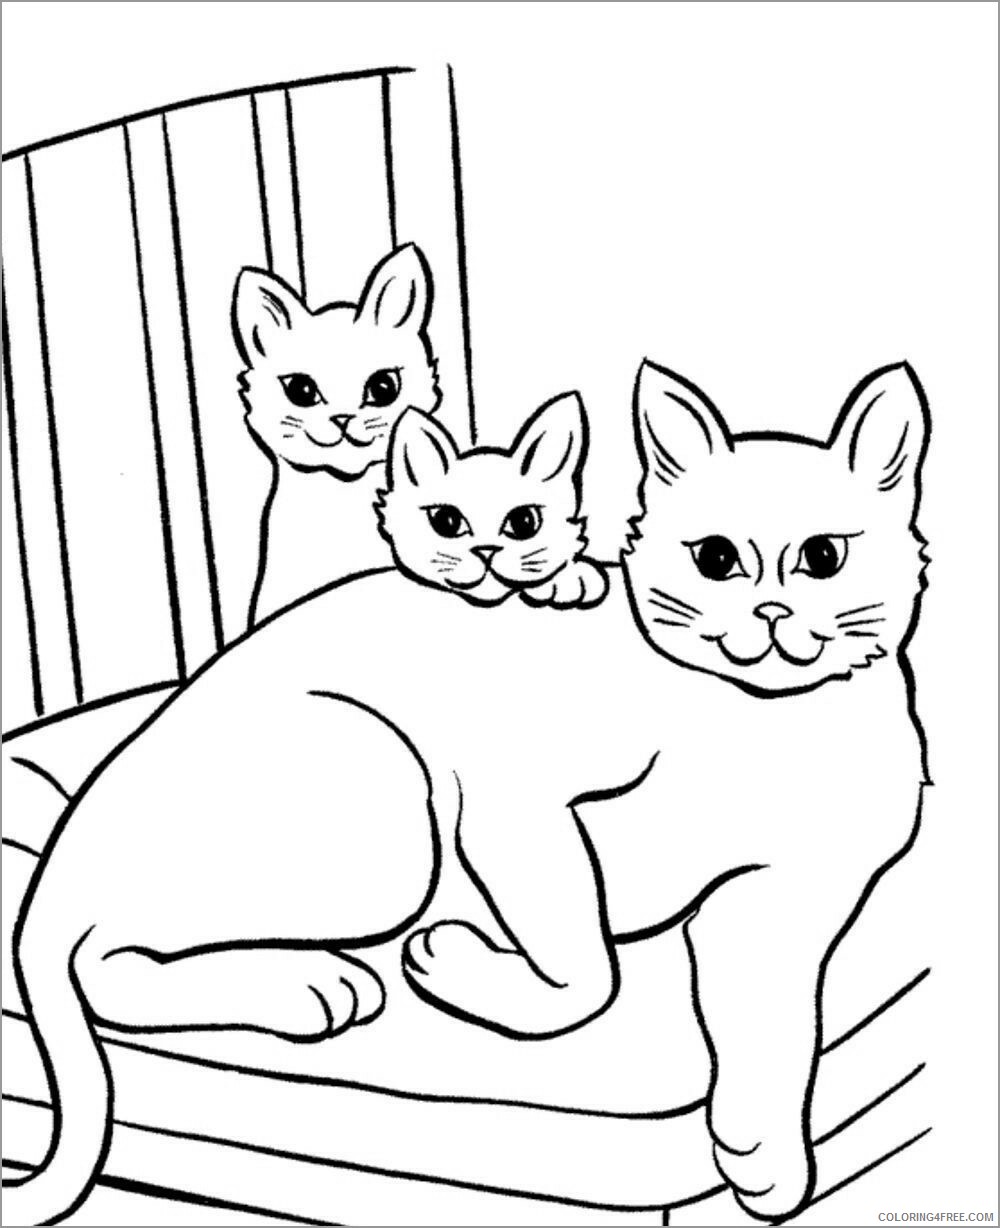 Cat Coloring Pages Animal Printable Sheets cartoon cat moms and baby 2021 0790 Coloring4free